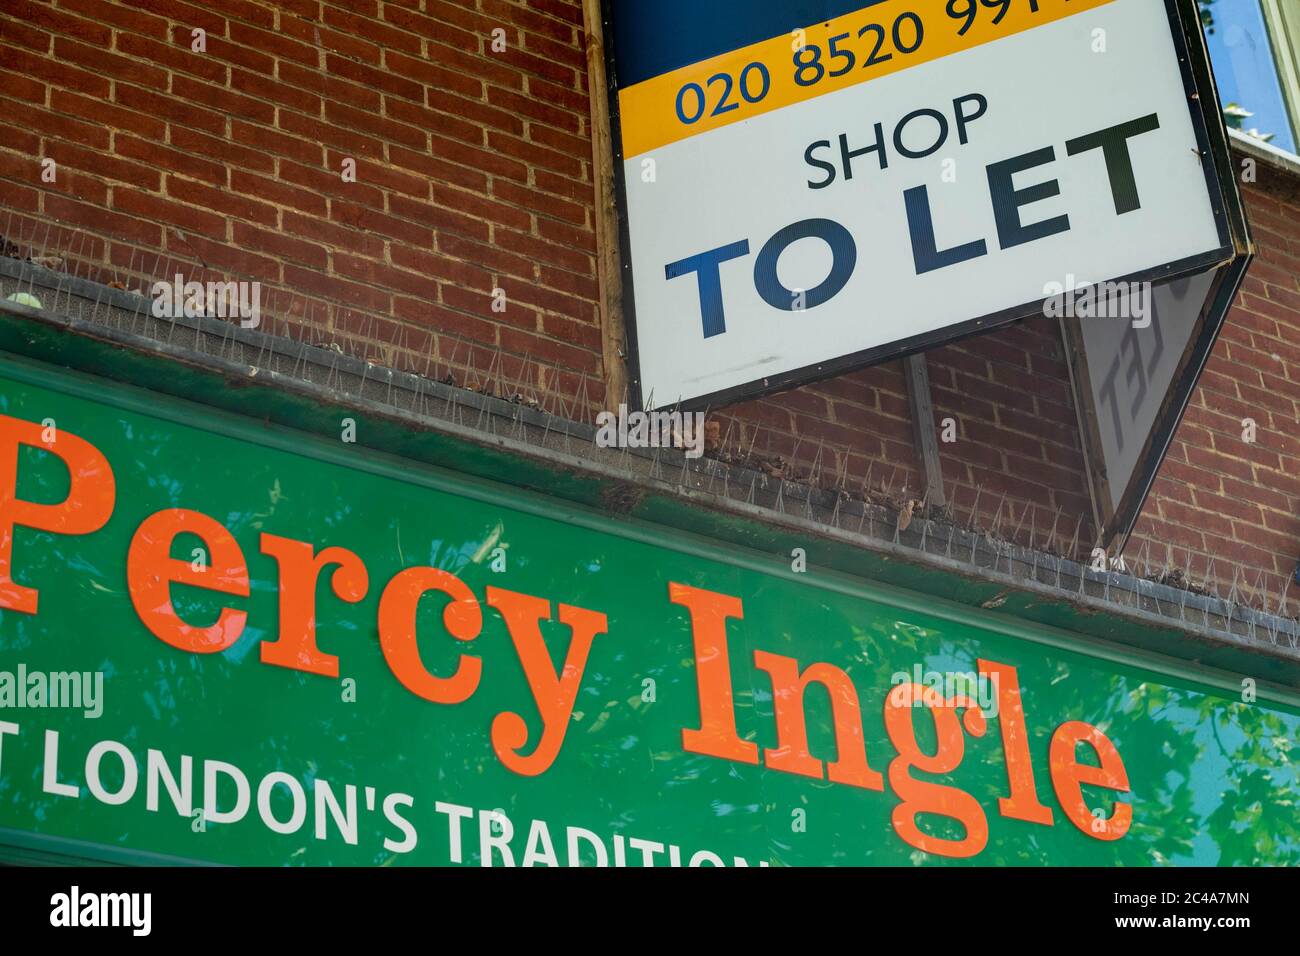 Brentwood Essex 25th June 2020 Percy Ingle, a traditional east end baker is to close all its stores afer sixty six years of tradingm Credit: Ian Davidson/Alamy Live News Stock Photo